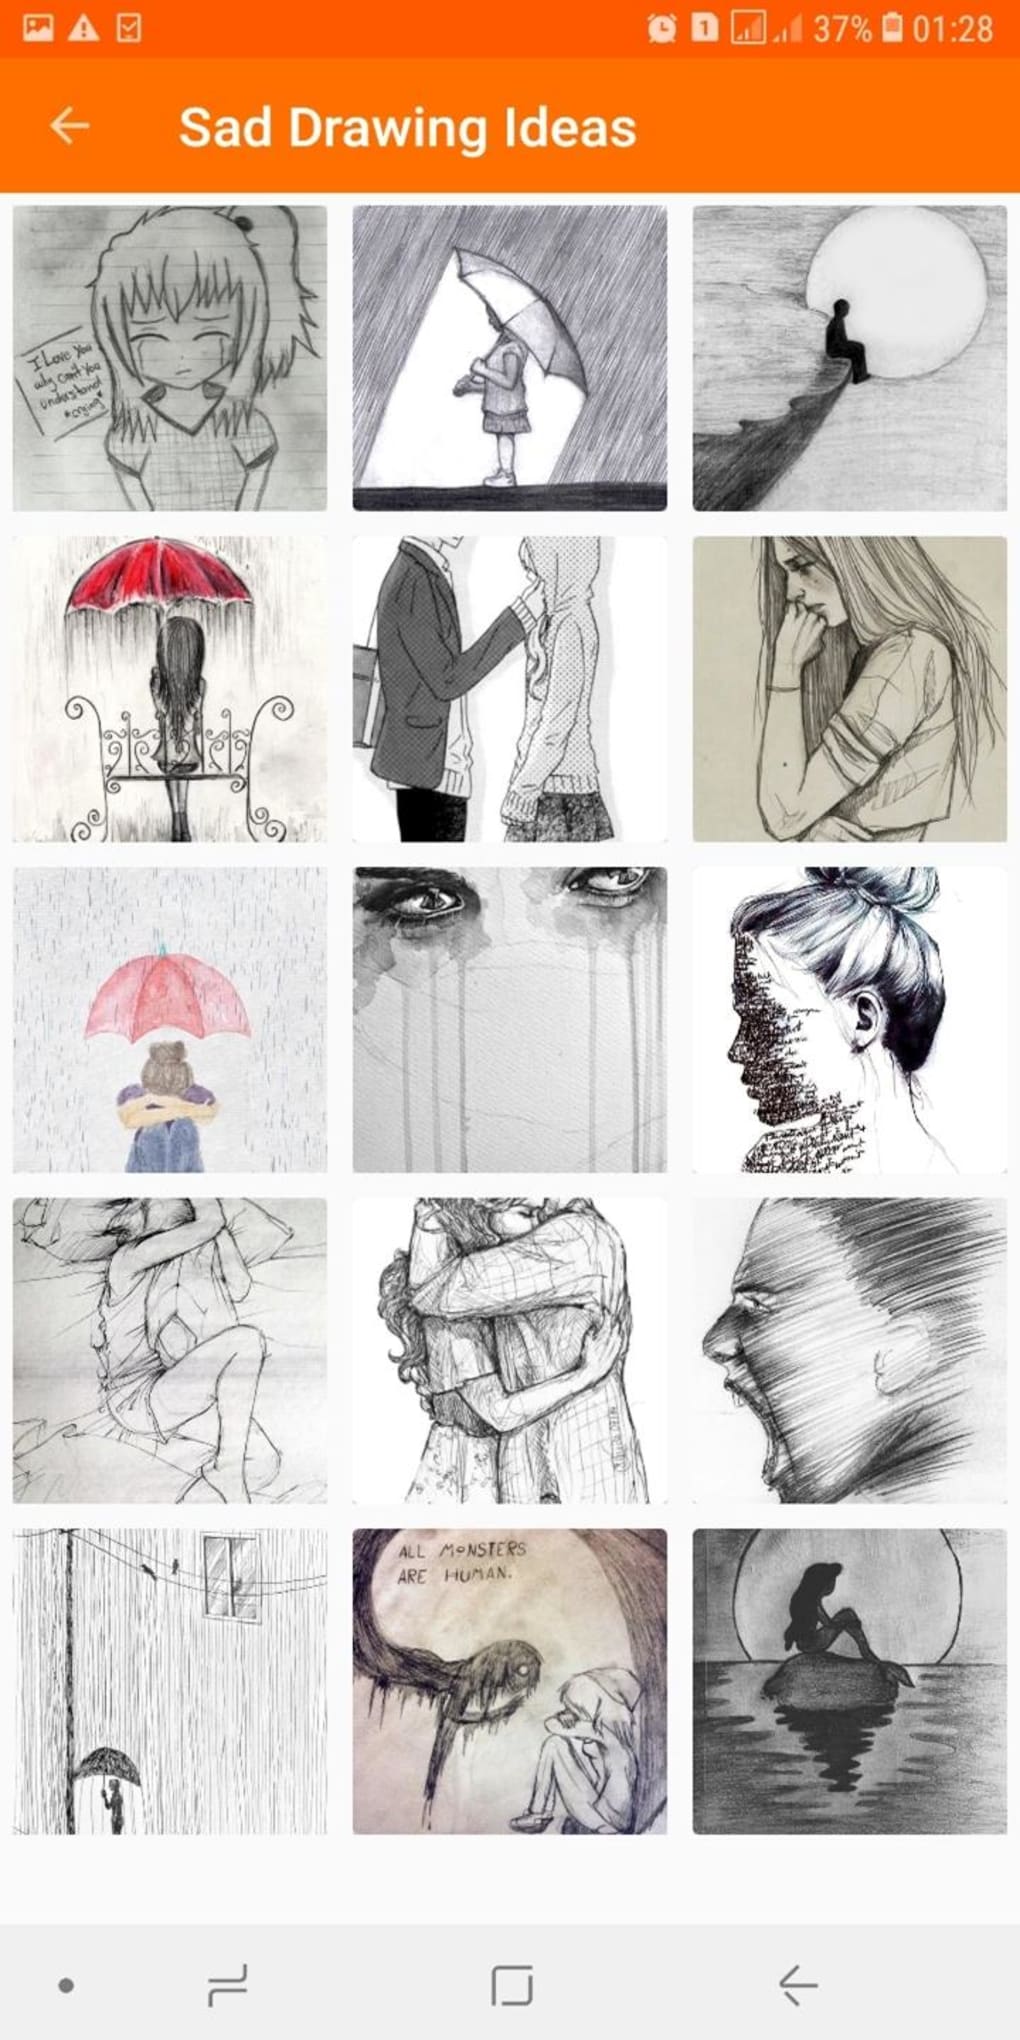 Download Sad Drawing Ideas Collection MOD APK v21.0.1 for Android